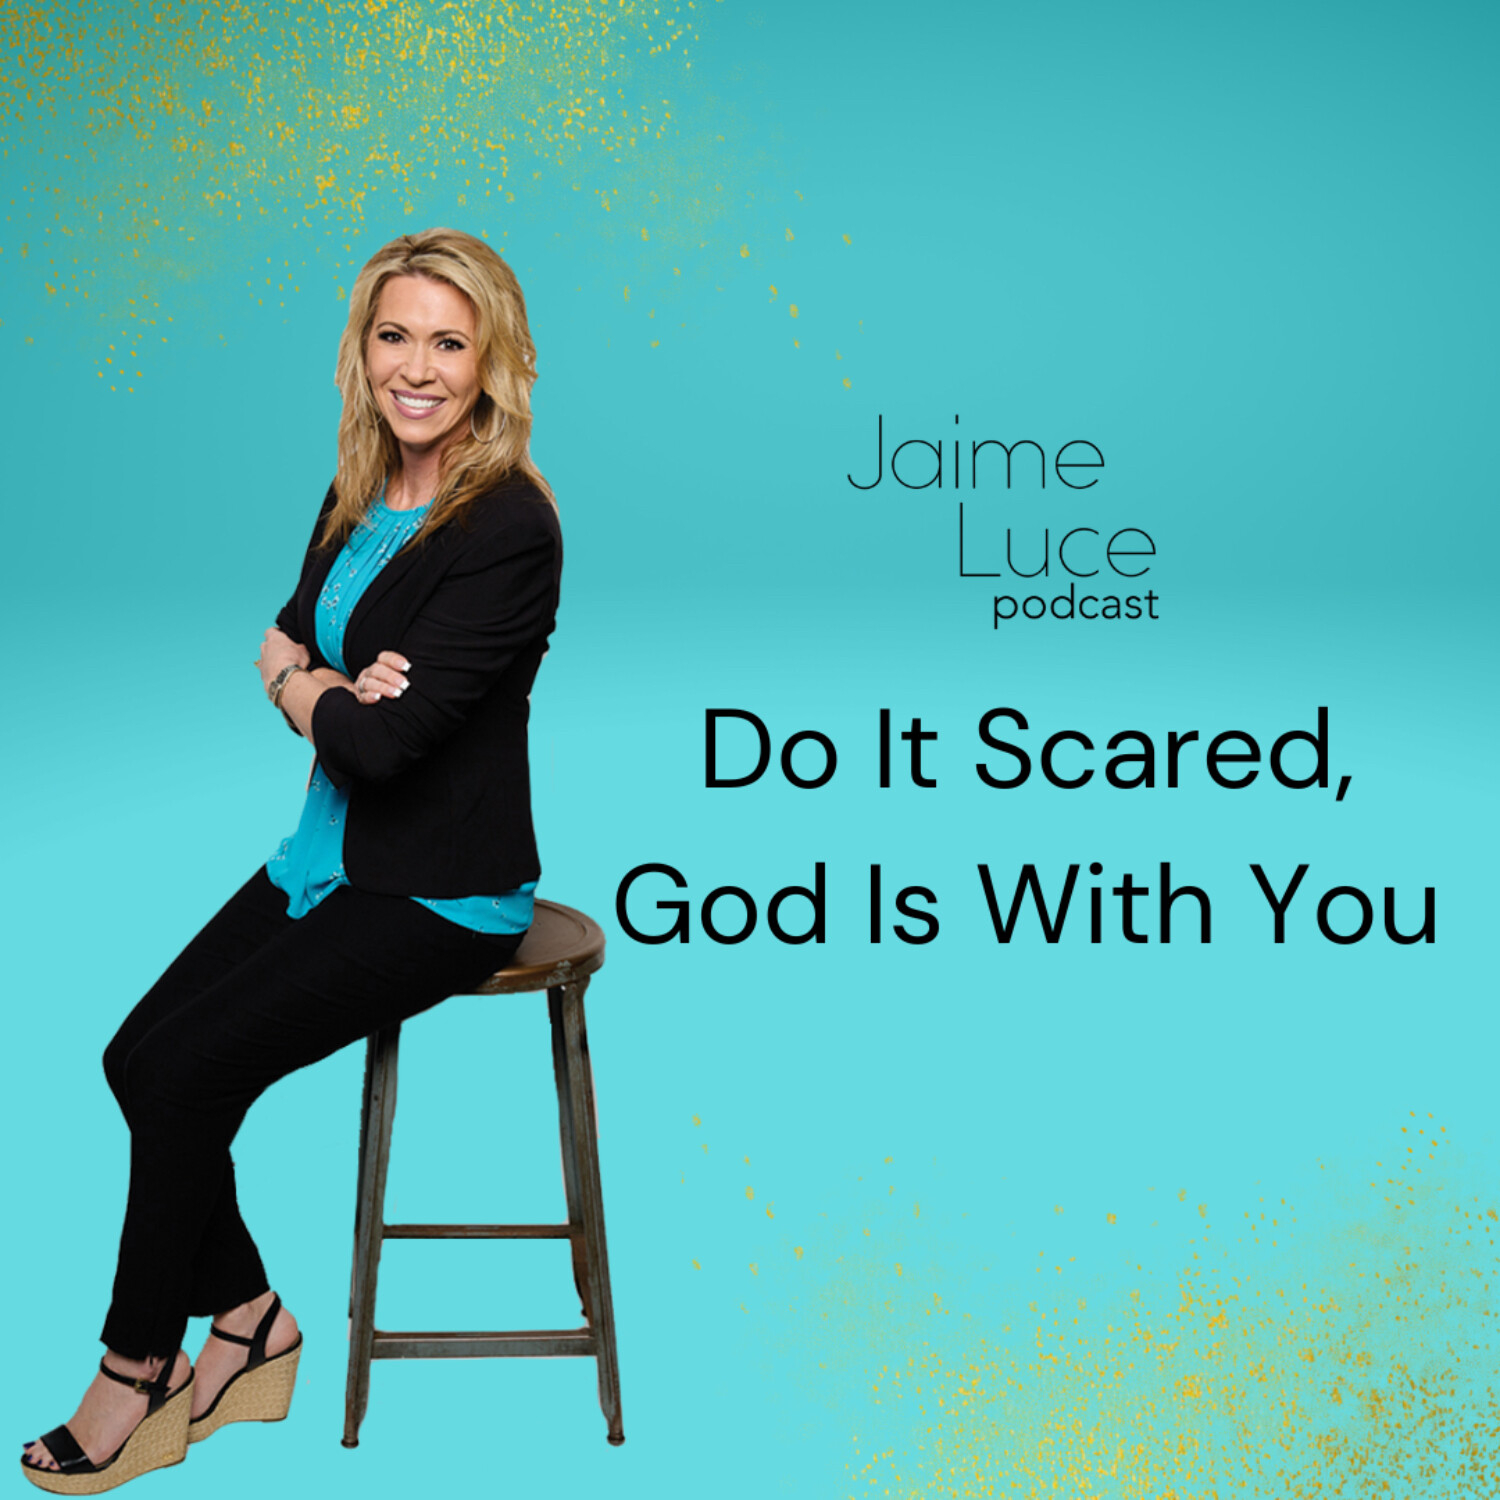 Do It Scared, God Is With You